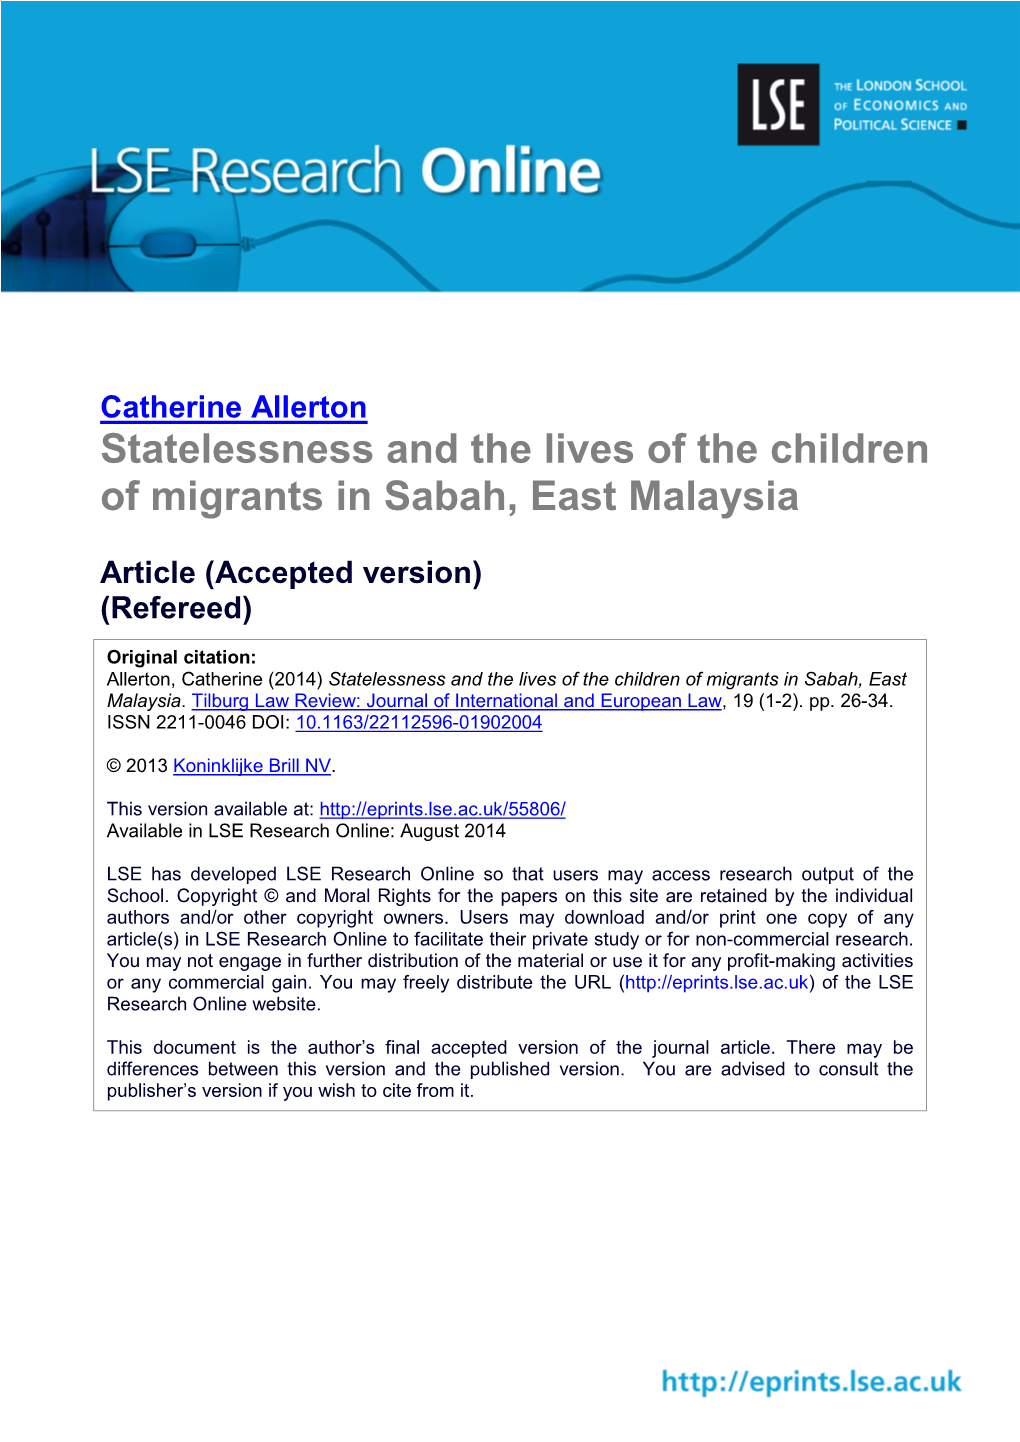 Statelessness and the Lives of the Children of Migrants in Sabah, East Malaysia